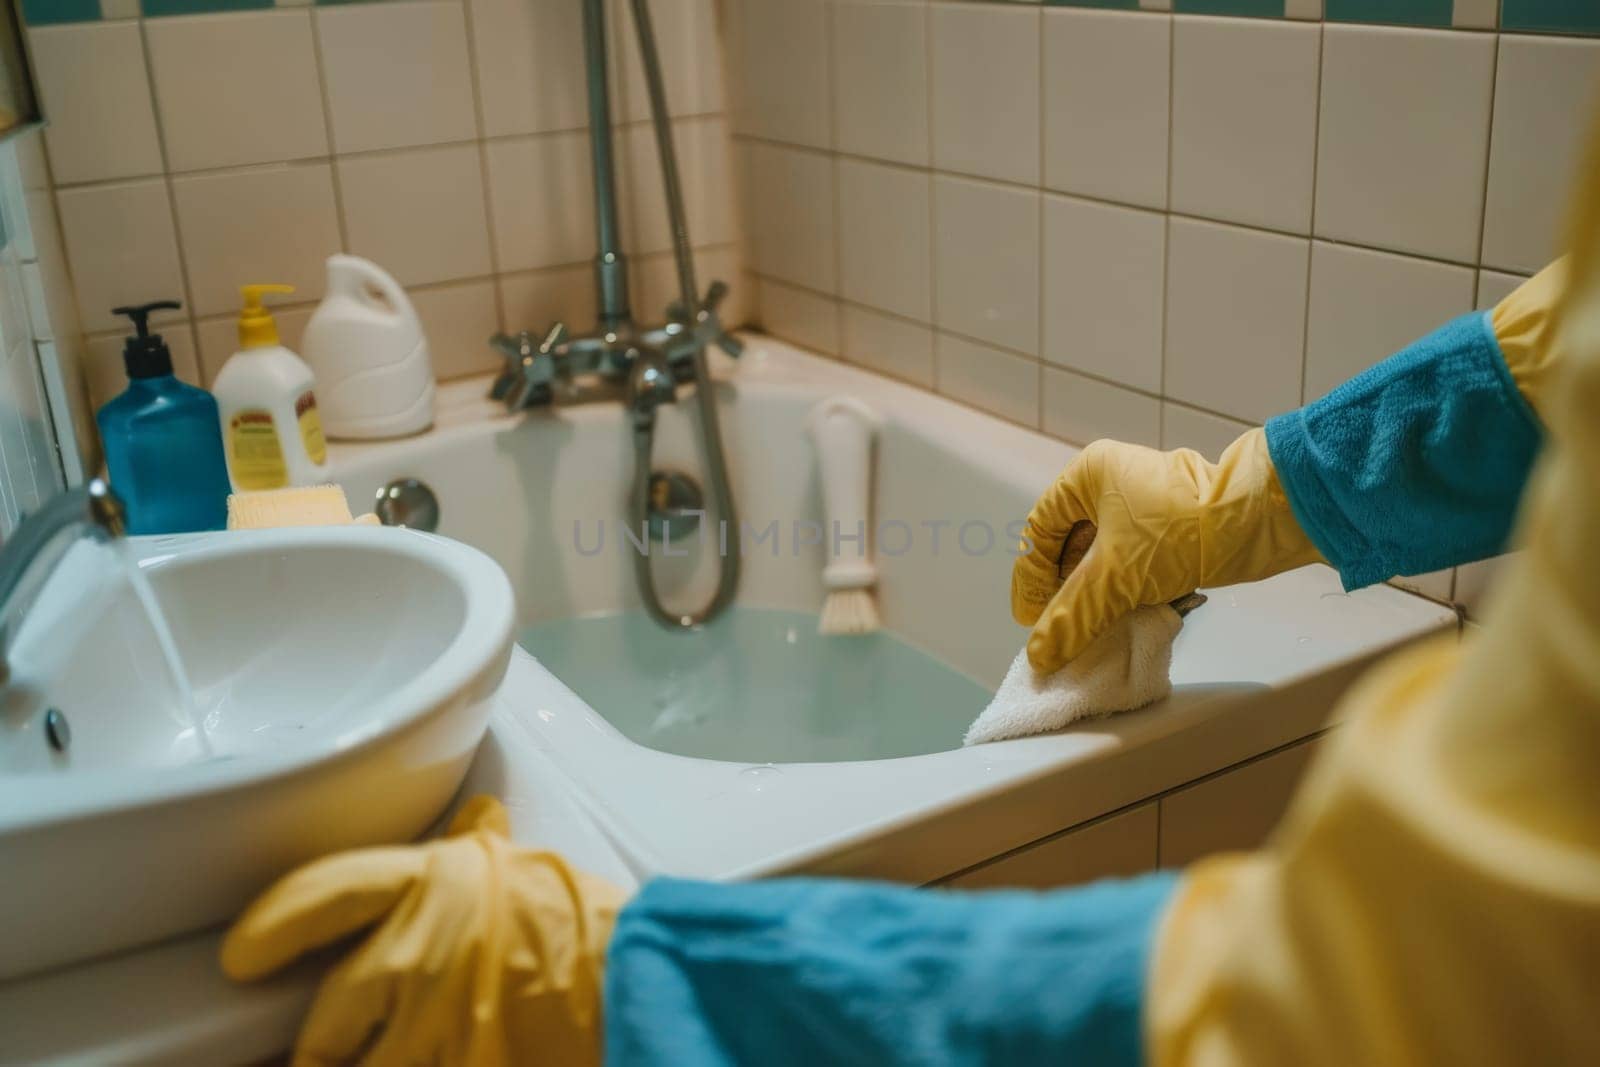 A person is cleaning a bathtub with a yellow glove on. The person is wearing a blue shirt and yellow gloves